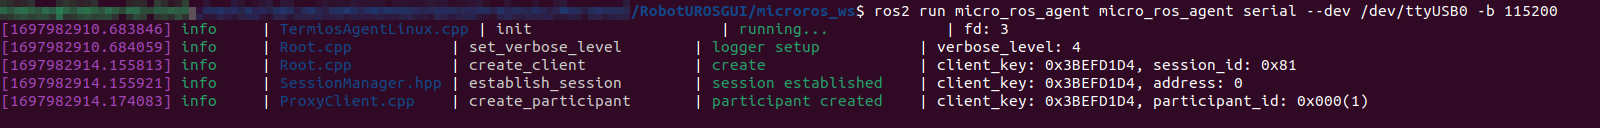 Micro ROS Agent Connection Terminal Output v4